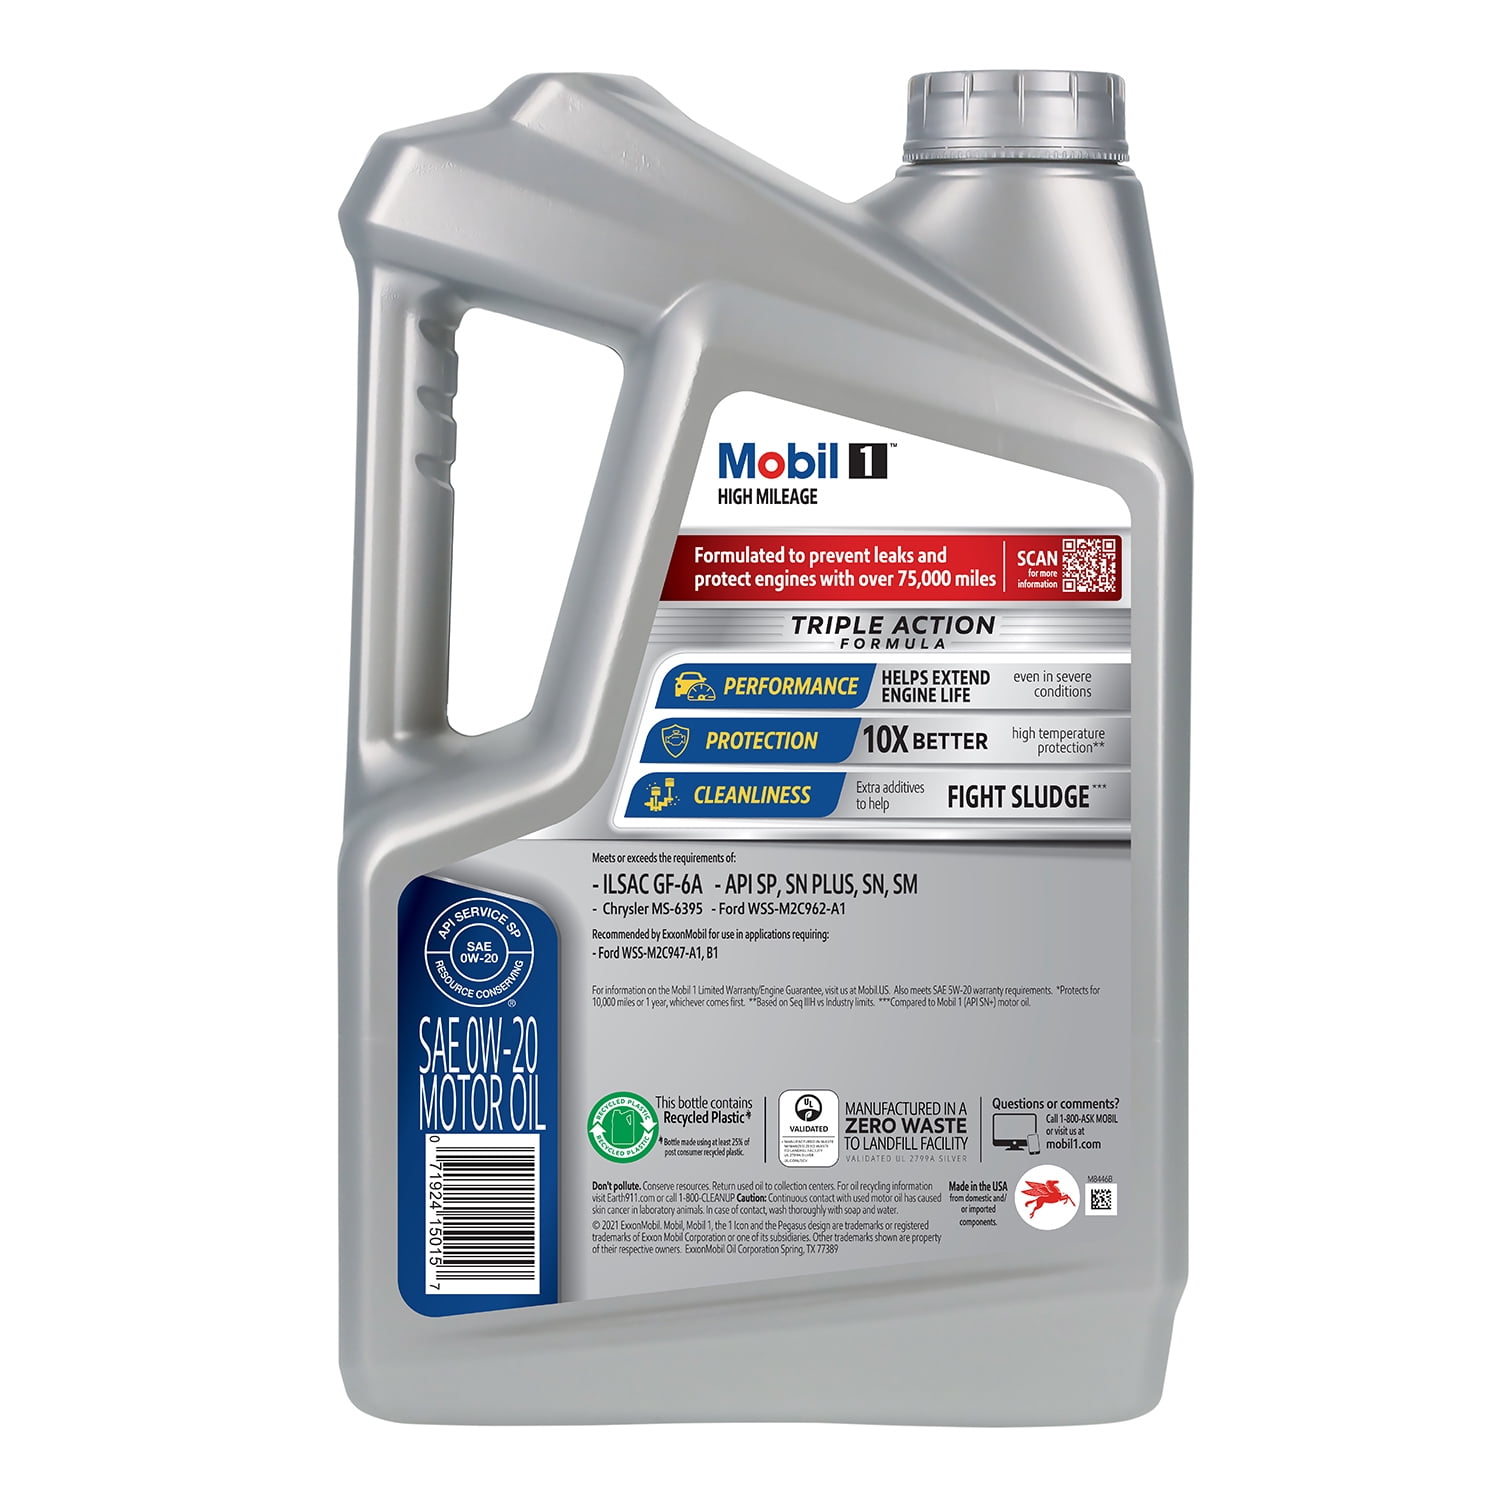 Mobil 1 High Mileage Full Synthetic Motor Oil 0W-20, 5 qt (3 Pack) - 3